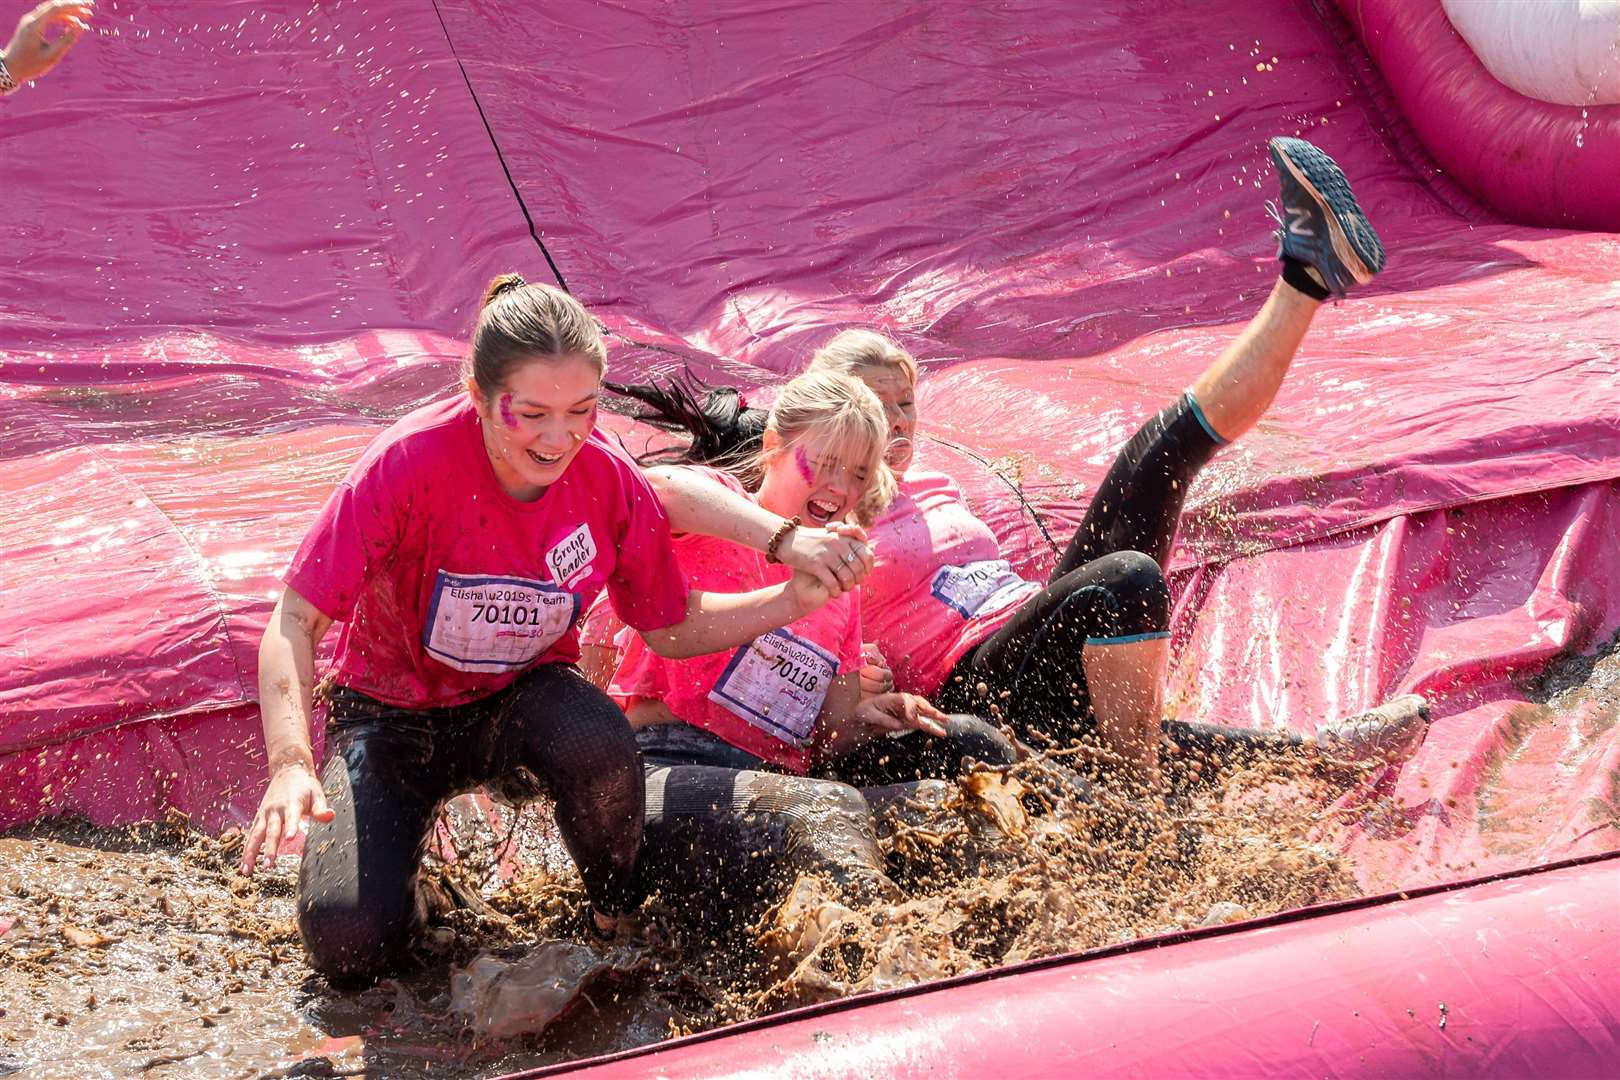 The inflatable slide at Pretty Muddy